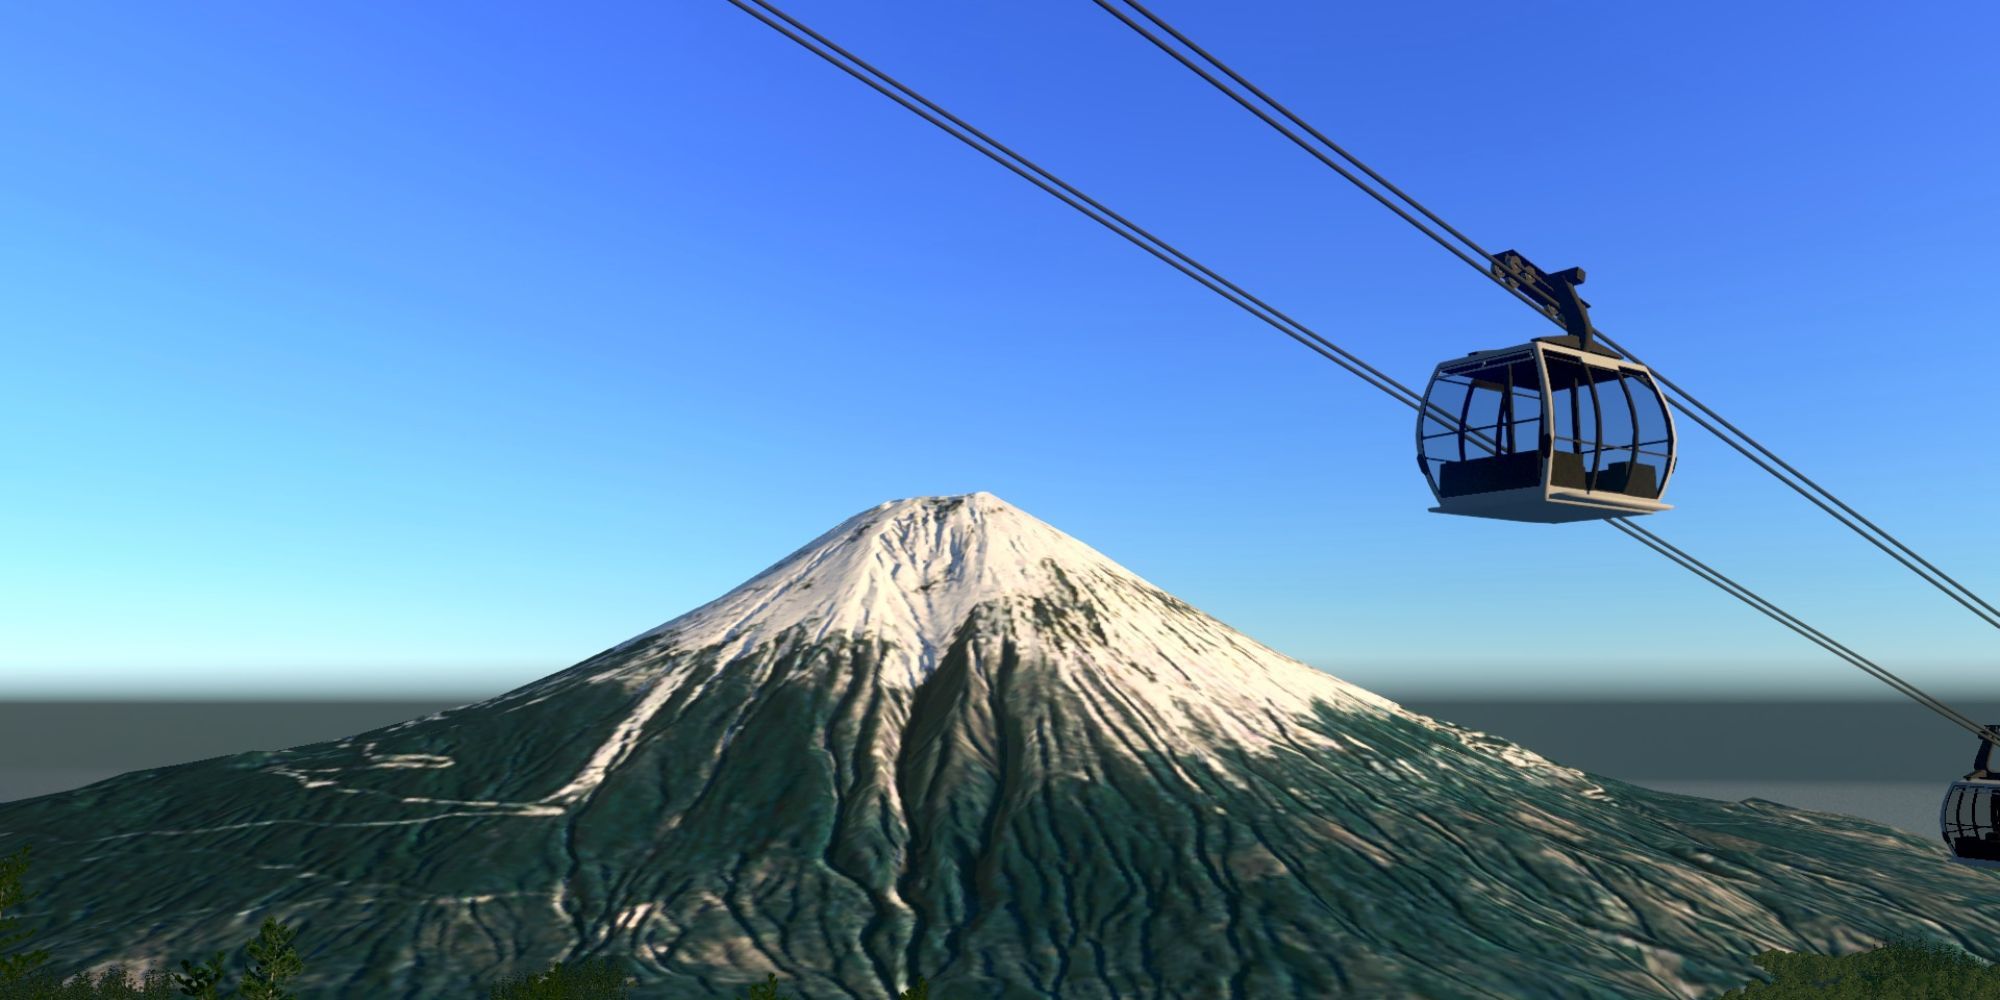  Cities: Skylines large mountain with cable cars going over 